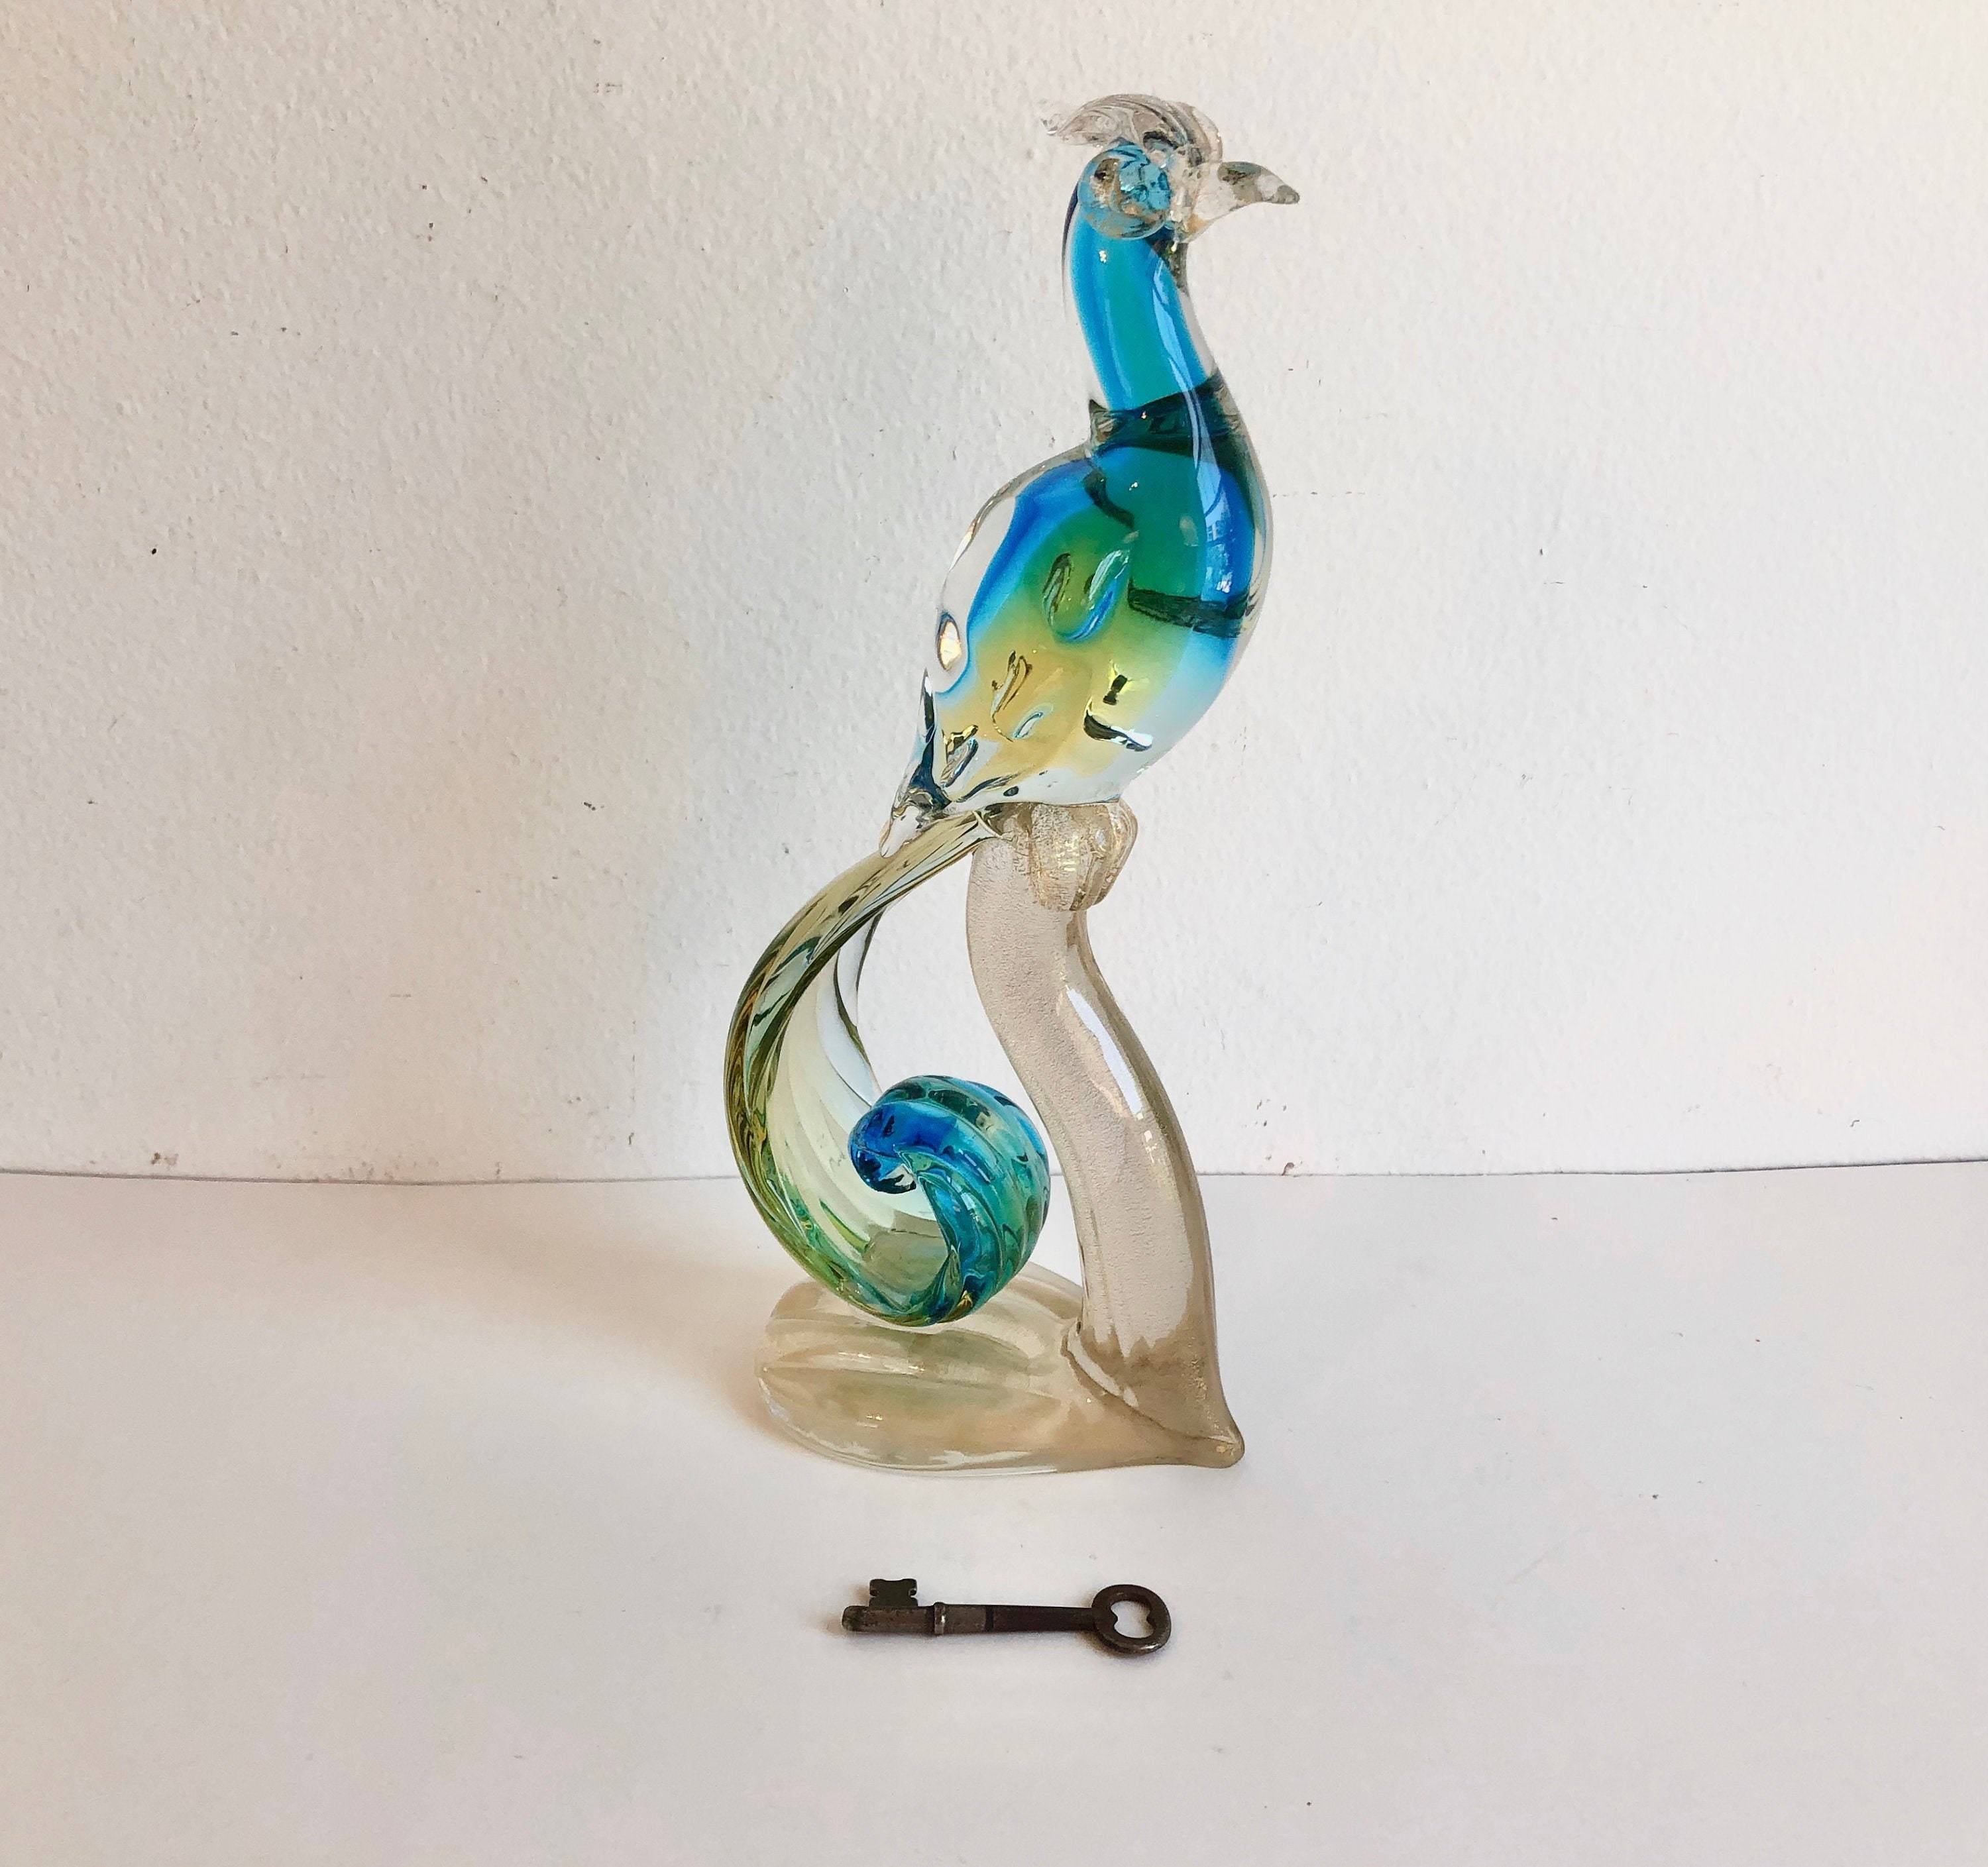 Blue Peacock Blown Glass Ornament 3 1/2” Round — Conway Glass